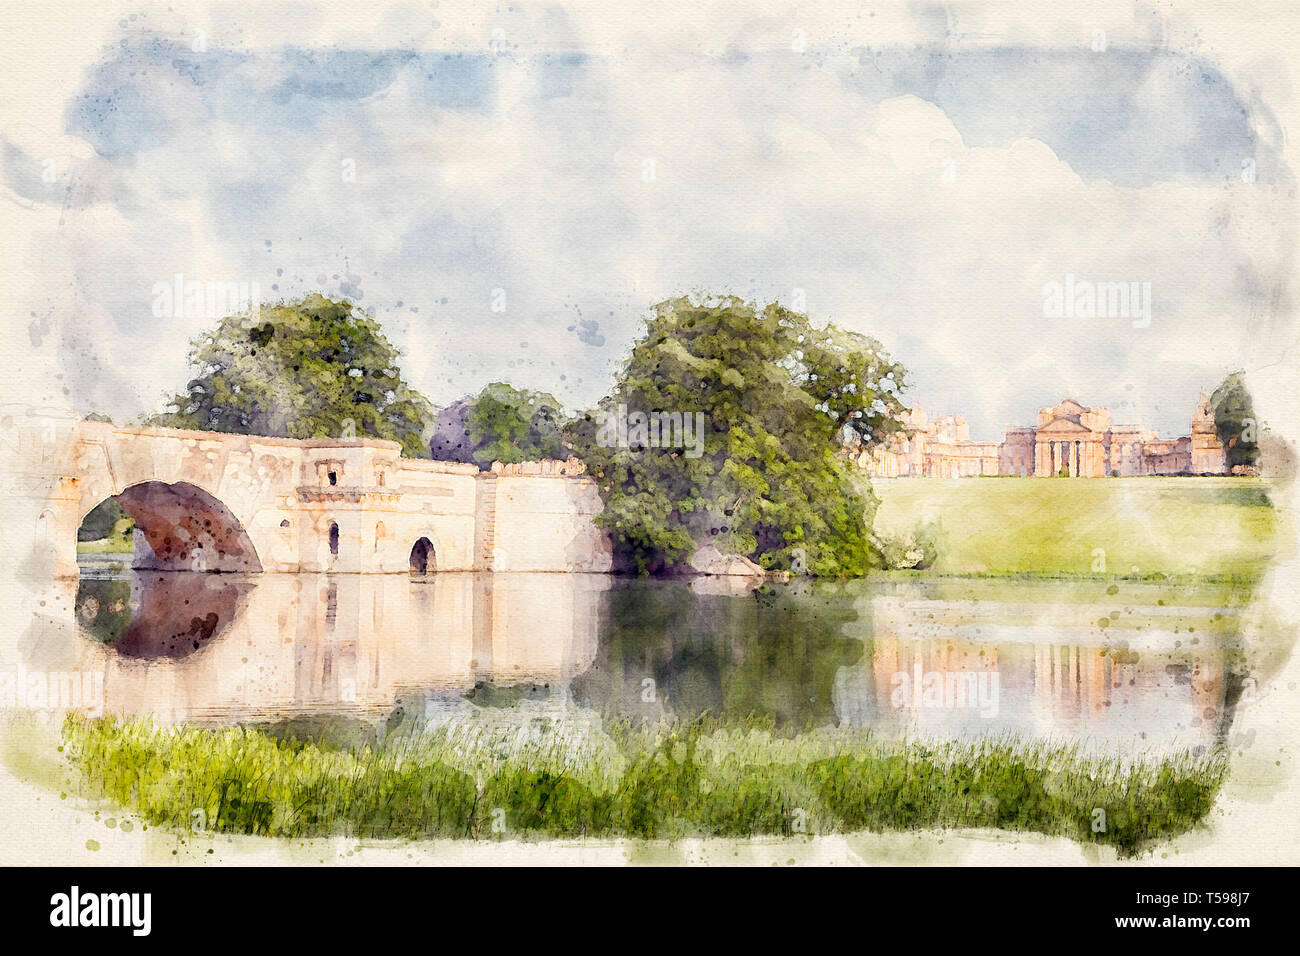 Watercolour effect from a photograph of Blenheim Palace, Oxfordshire, England, UK Stock Photo